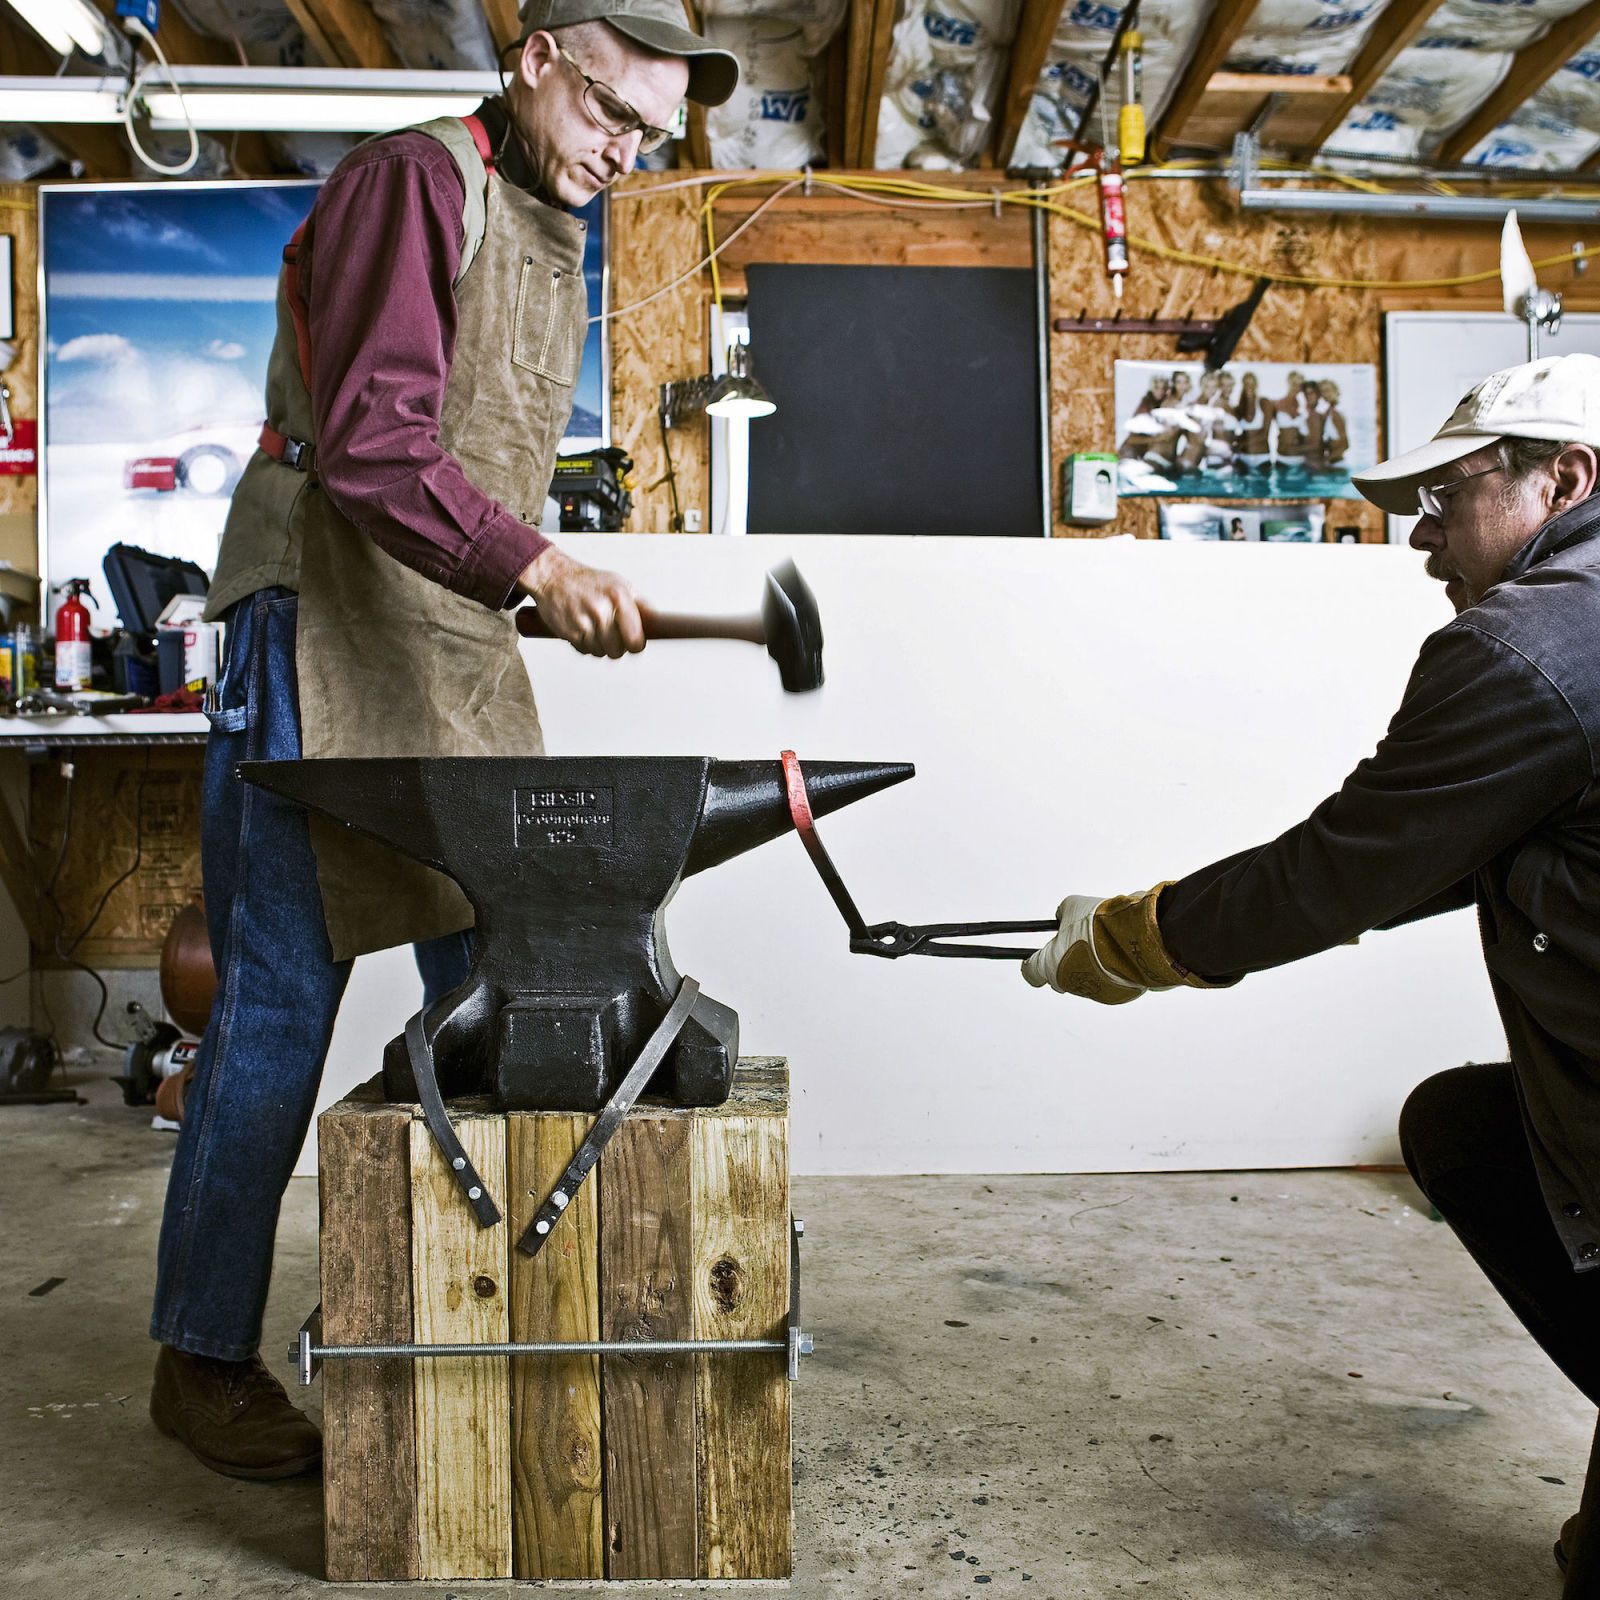 Blacksmithing 101: How to Make a Forge and Start Hammering Metal